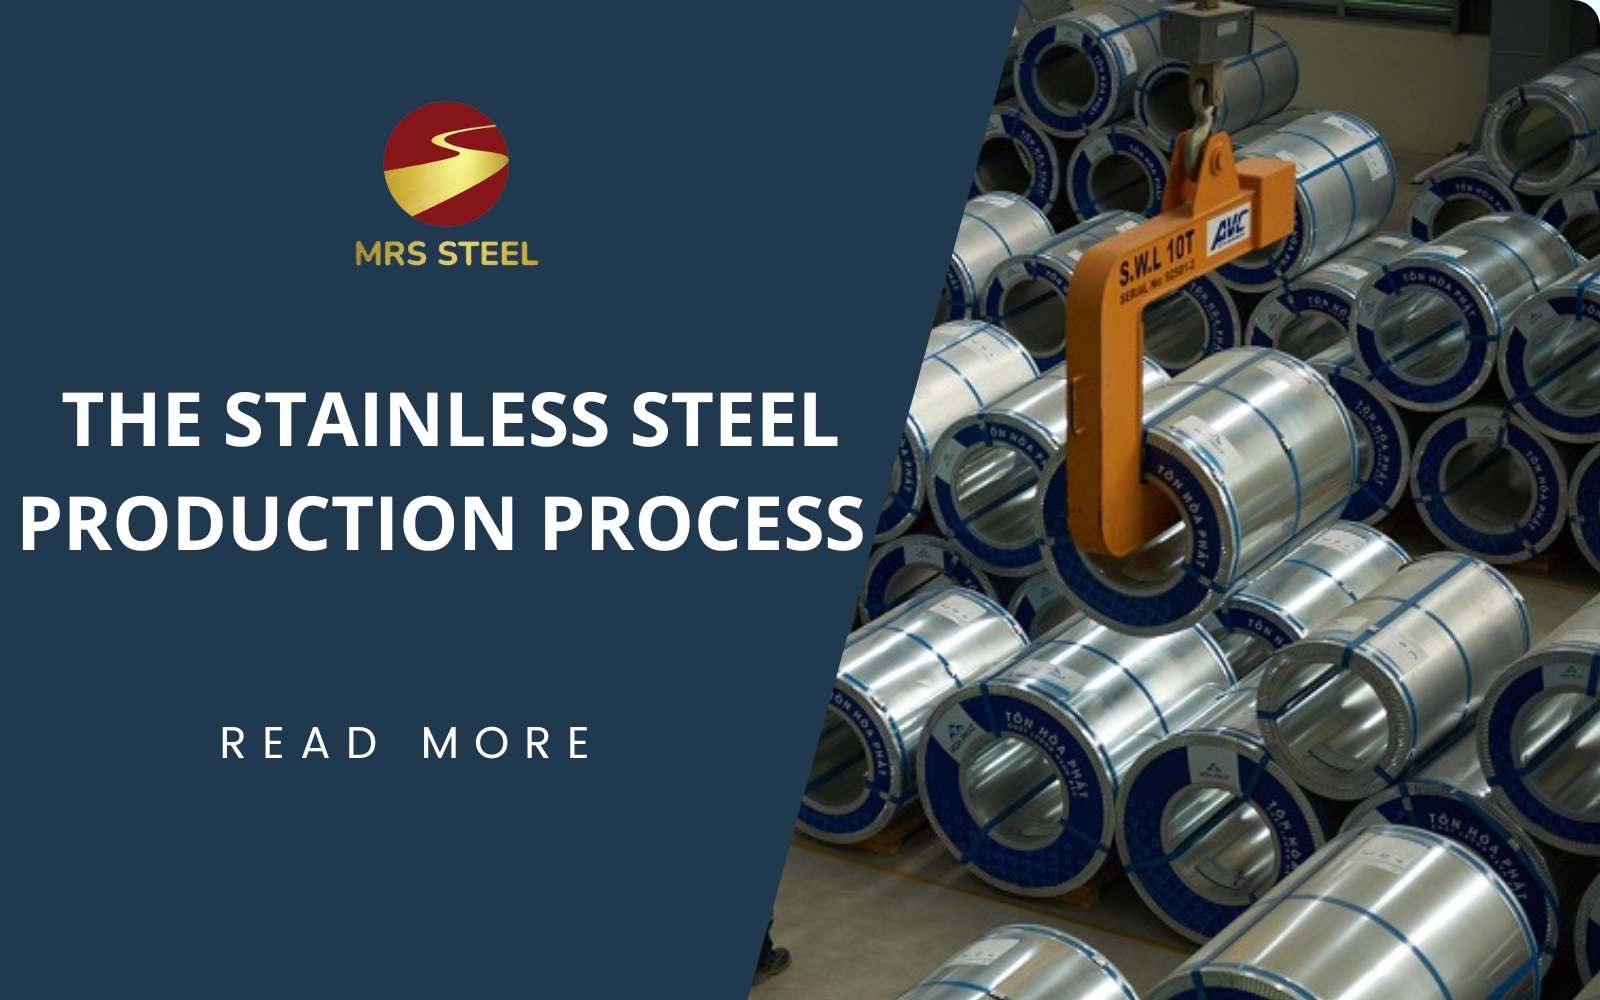 How is stainless steel made? Let's learn about the stainless steel production process